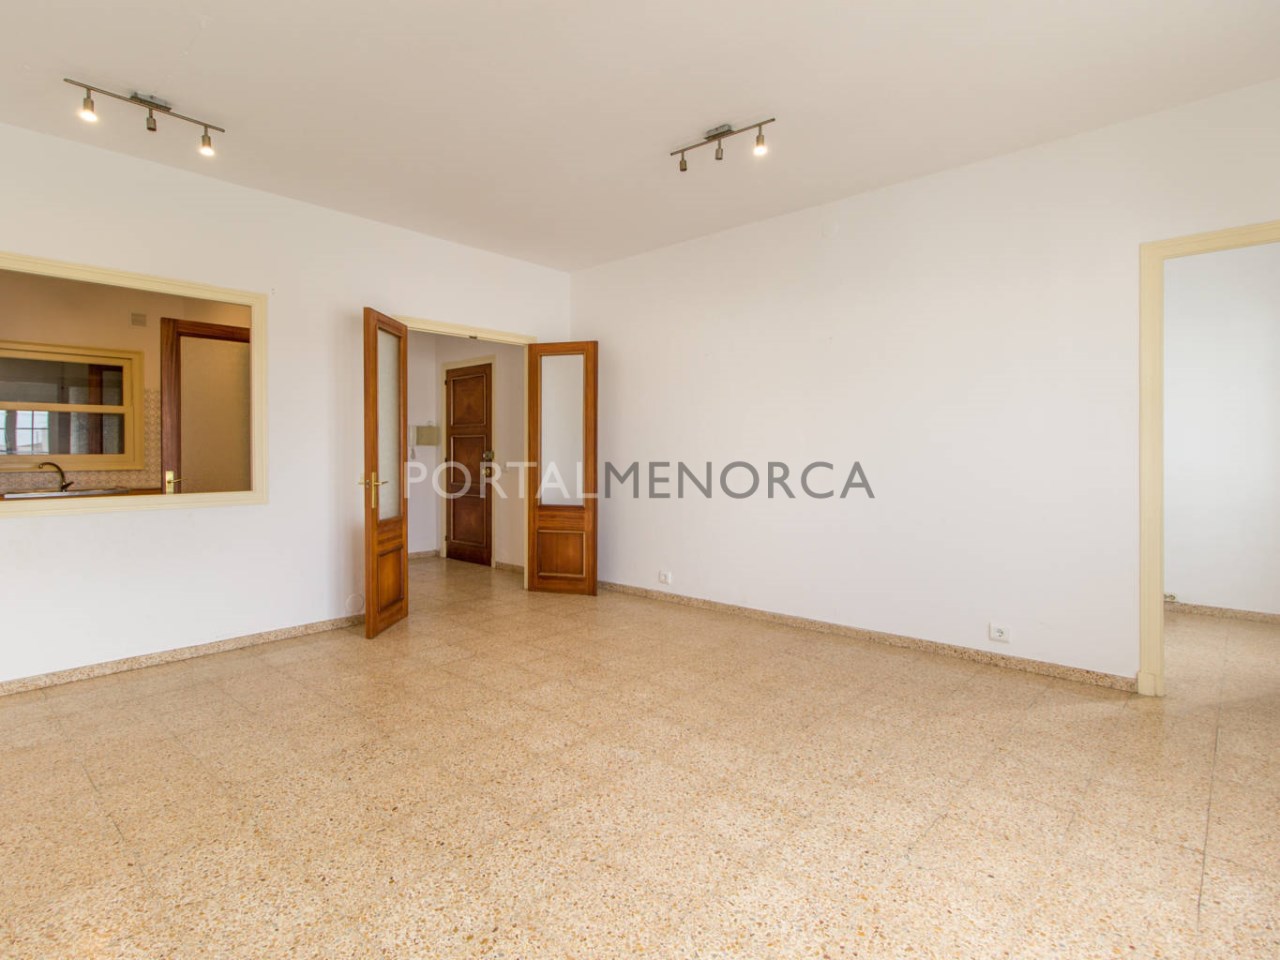 Large appartment for sale in Menorca